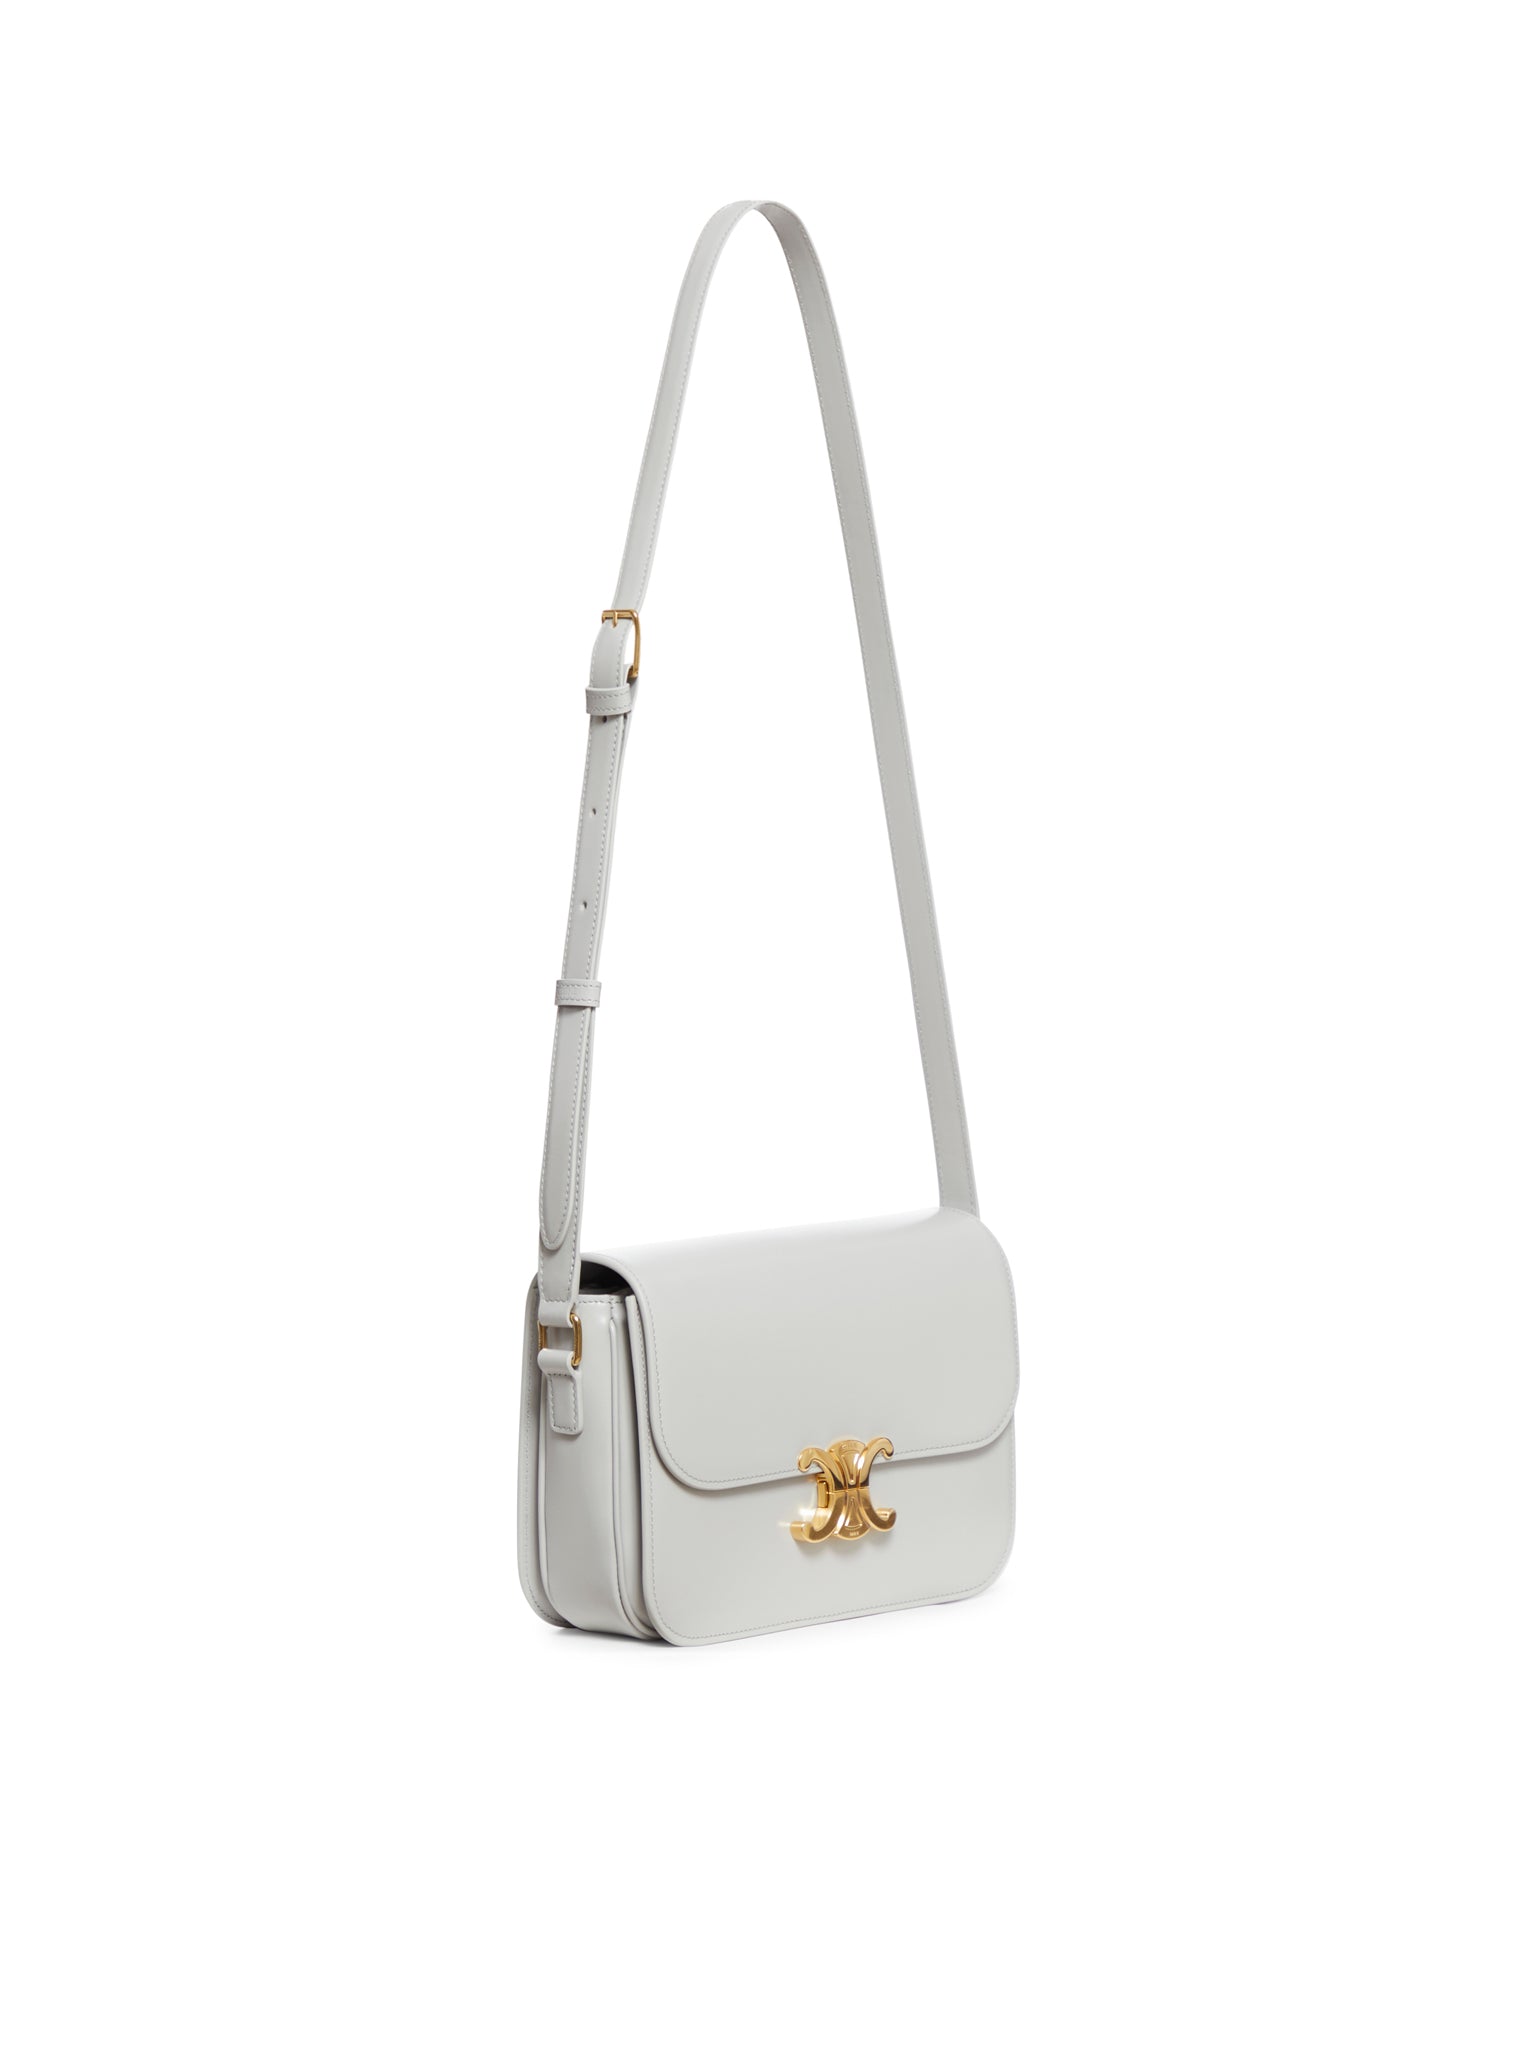 TRIOMPHE CLASSIQUE BAG IN  POLISHED CALF LEATHER